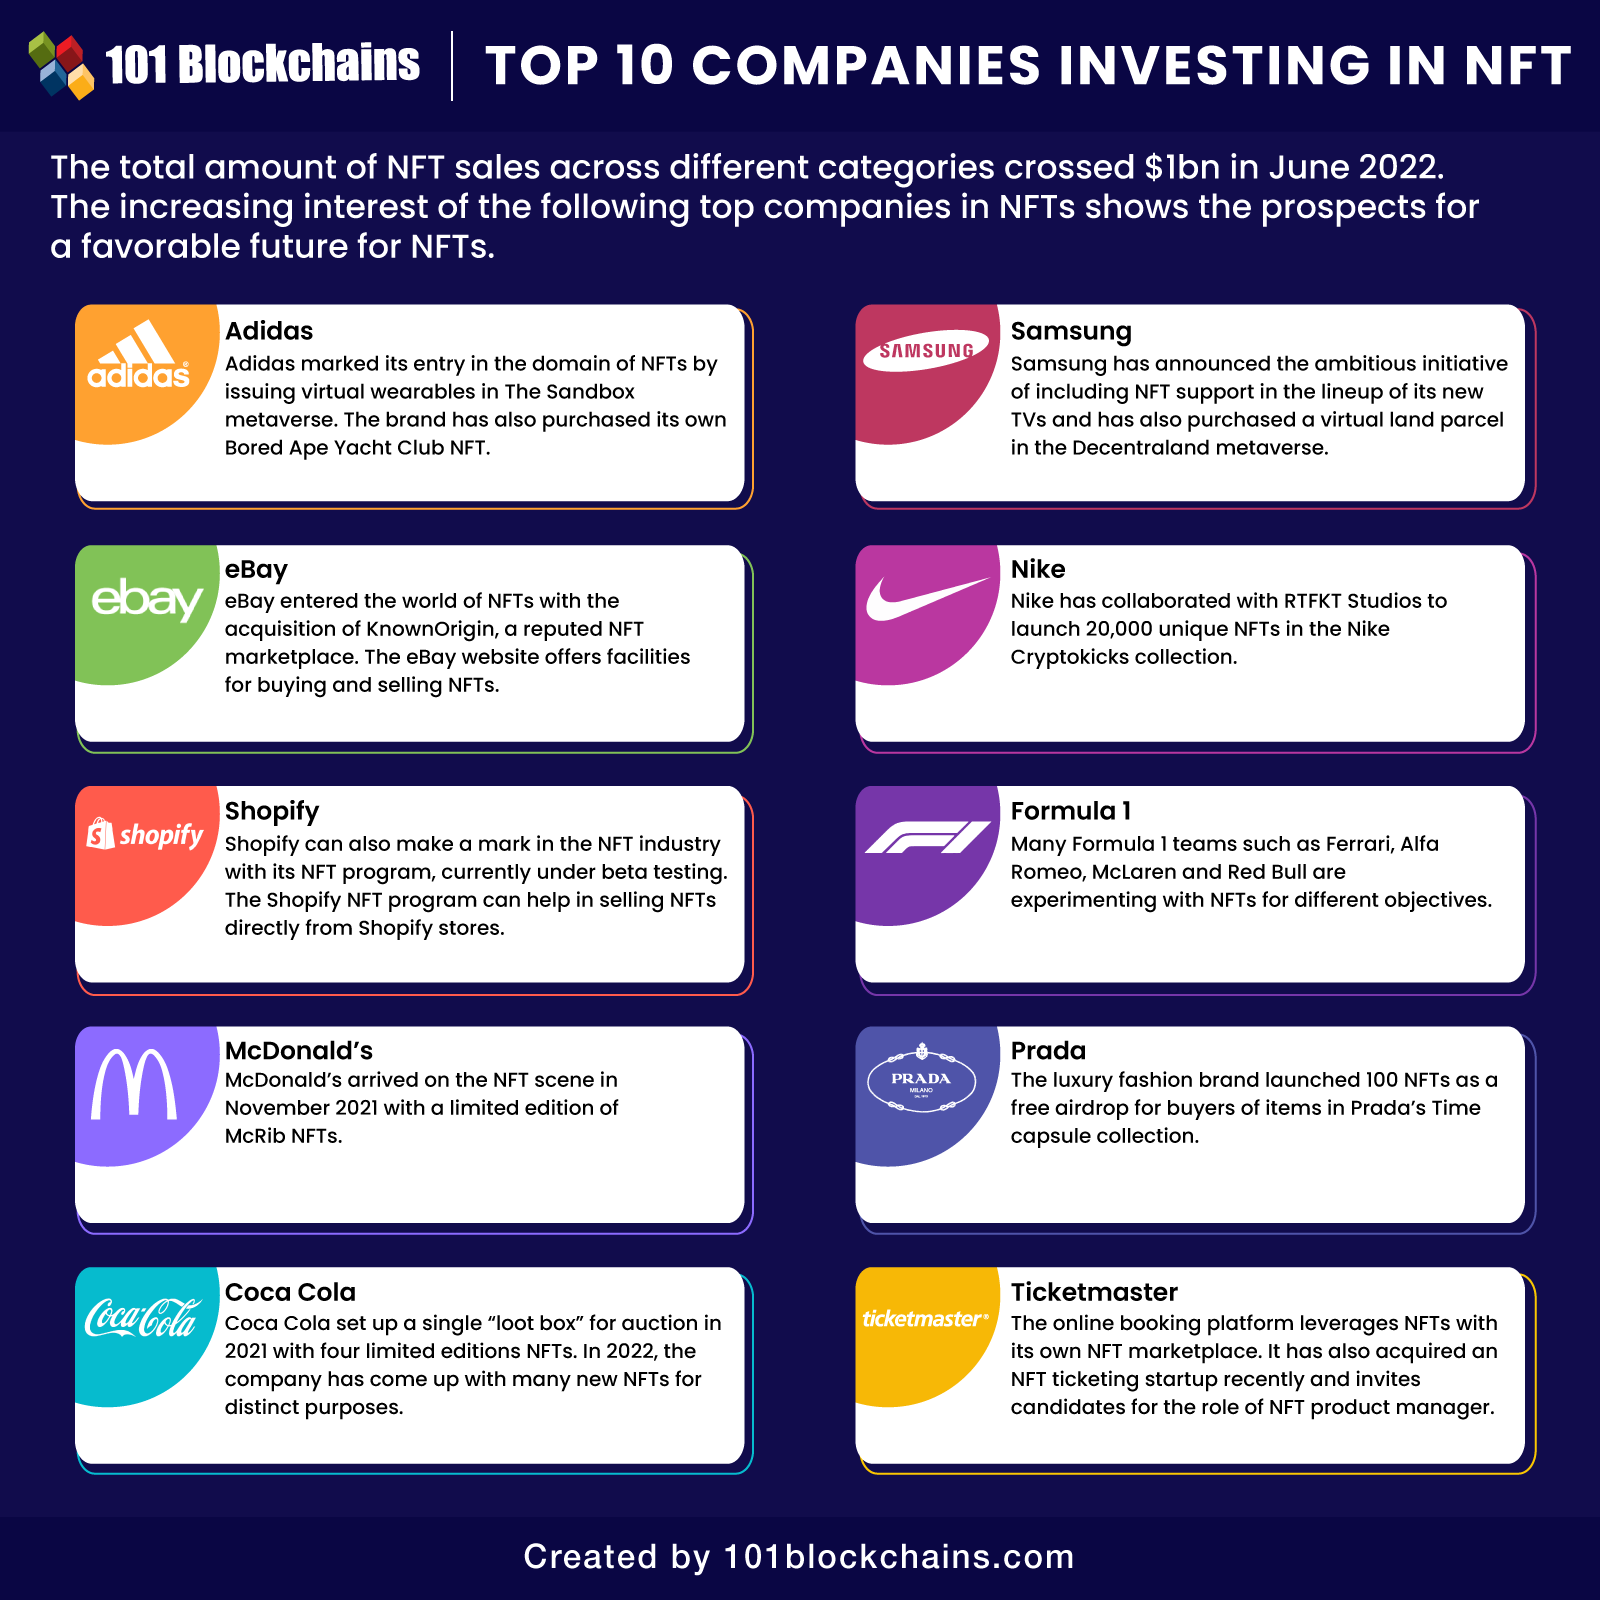 Top Companies investing in NFT